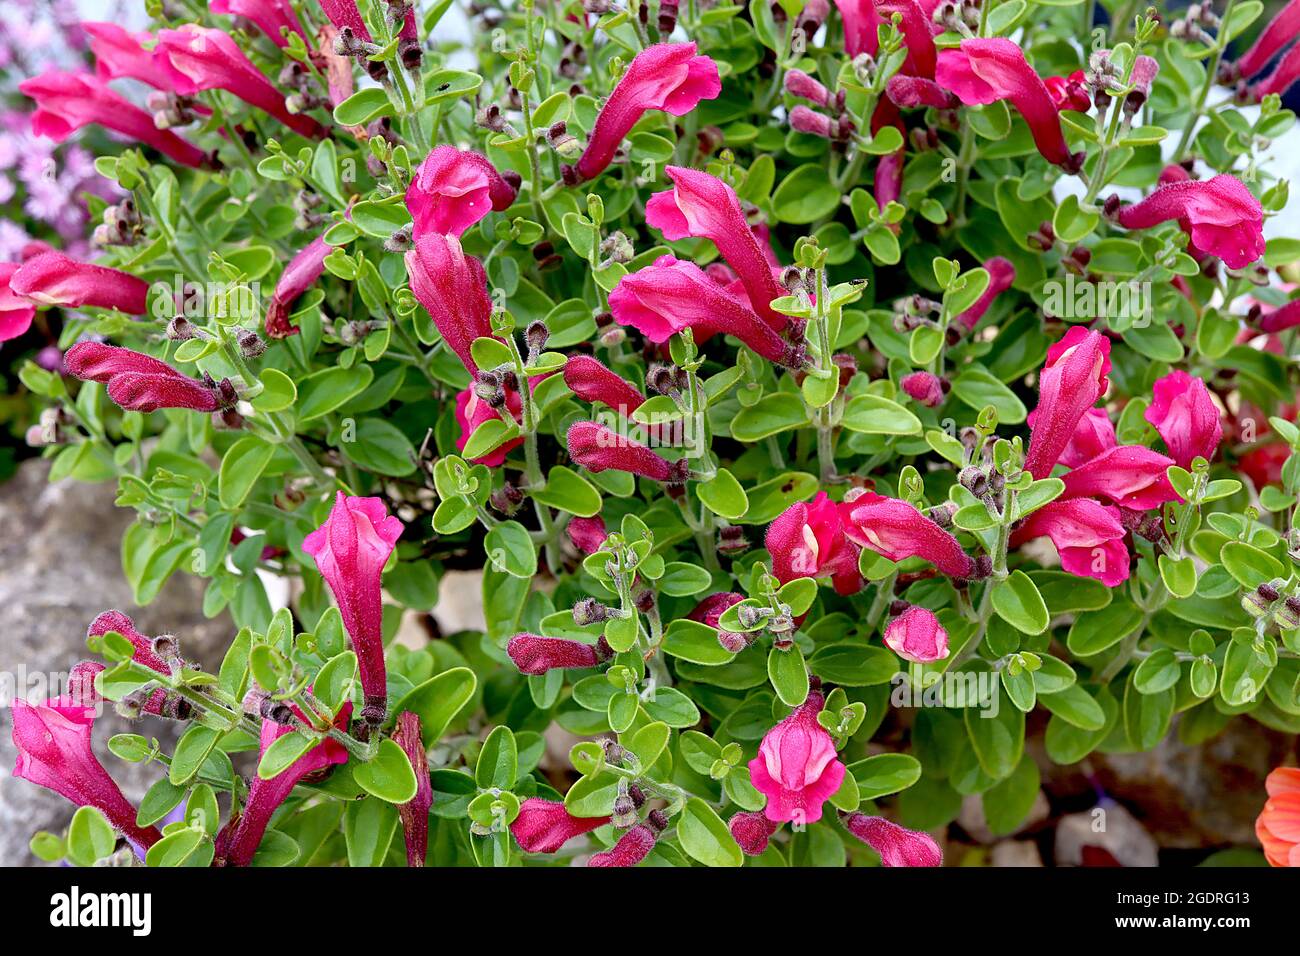 Scuttelaria suffrutescens ‘Texas Rose’ skullcap Texas Rose – salvia-like flowers with deep pink petals, small oval mid green leaves,  July, England,UK Stock Photo